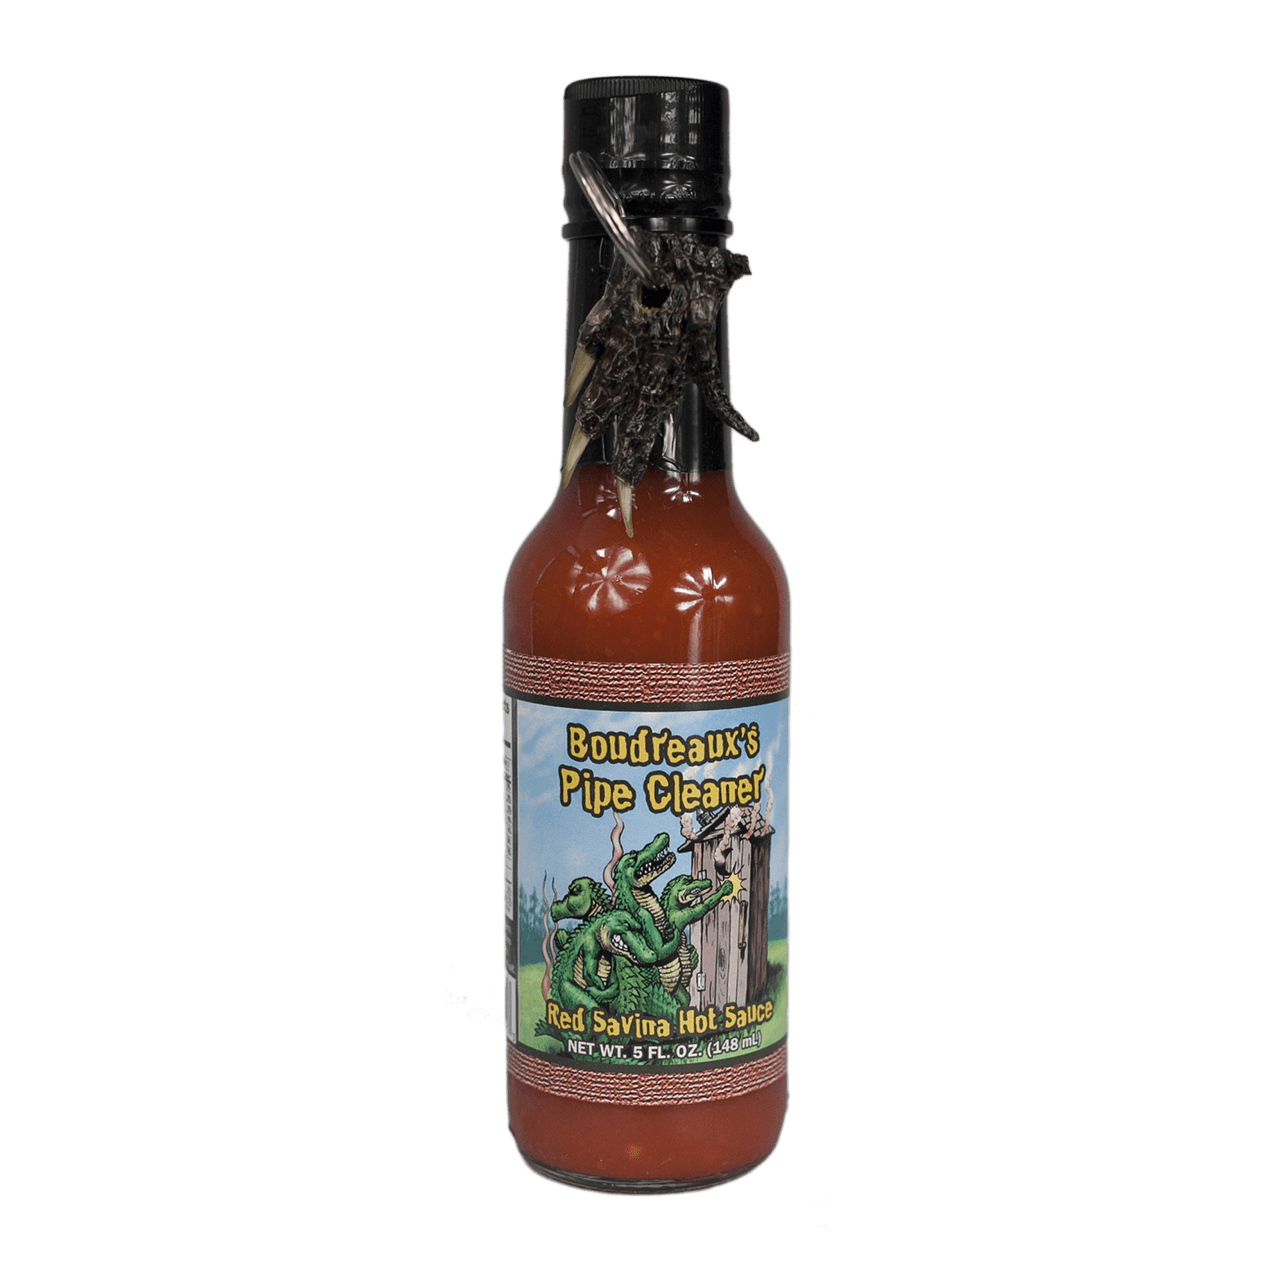 Boudreaux's Pipe Cleaner Red Savina Hot Sauce